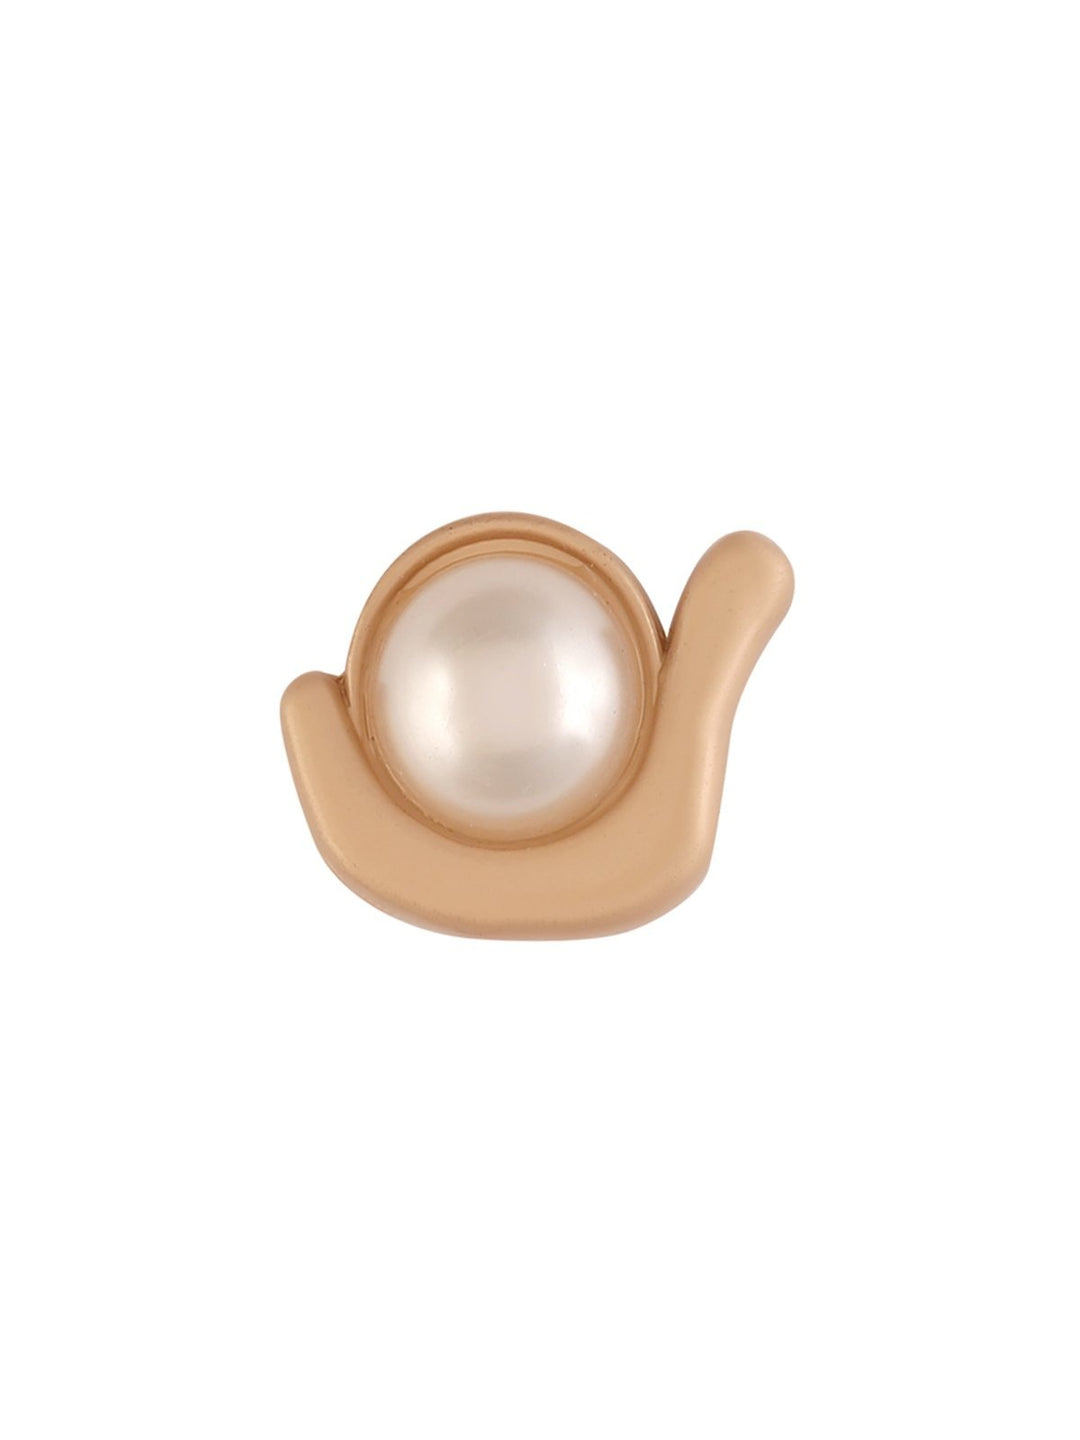 Matte Gold Decorative Pearl Button with Downhole Loop